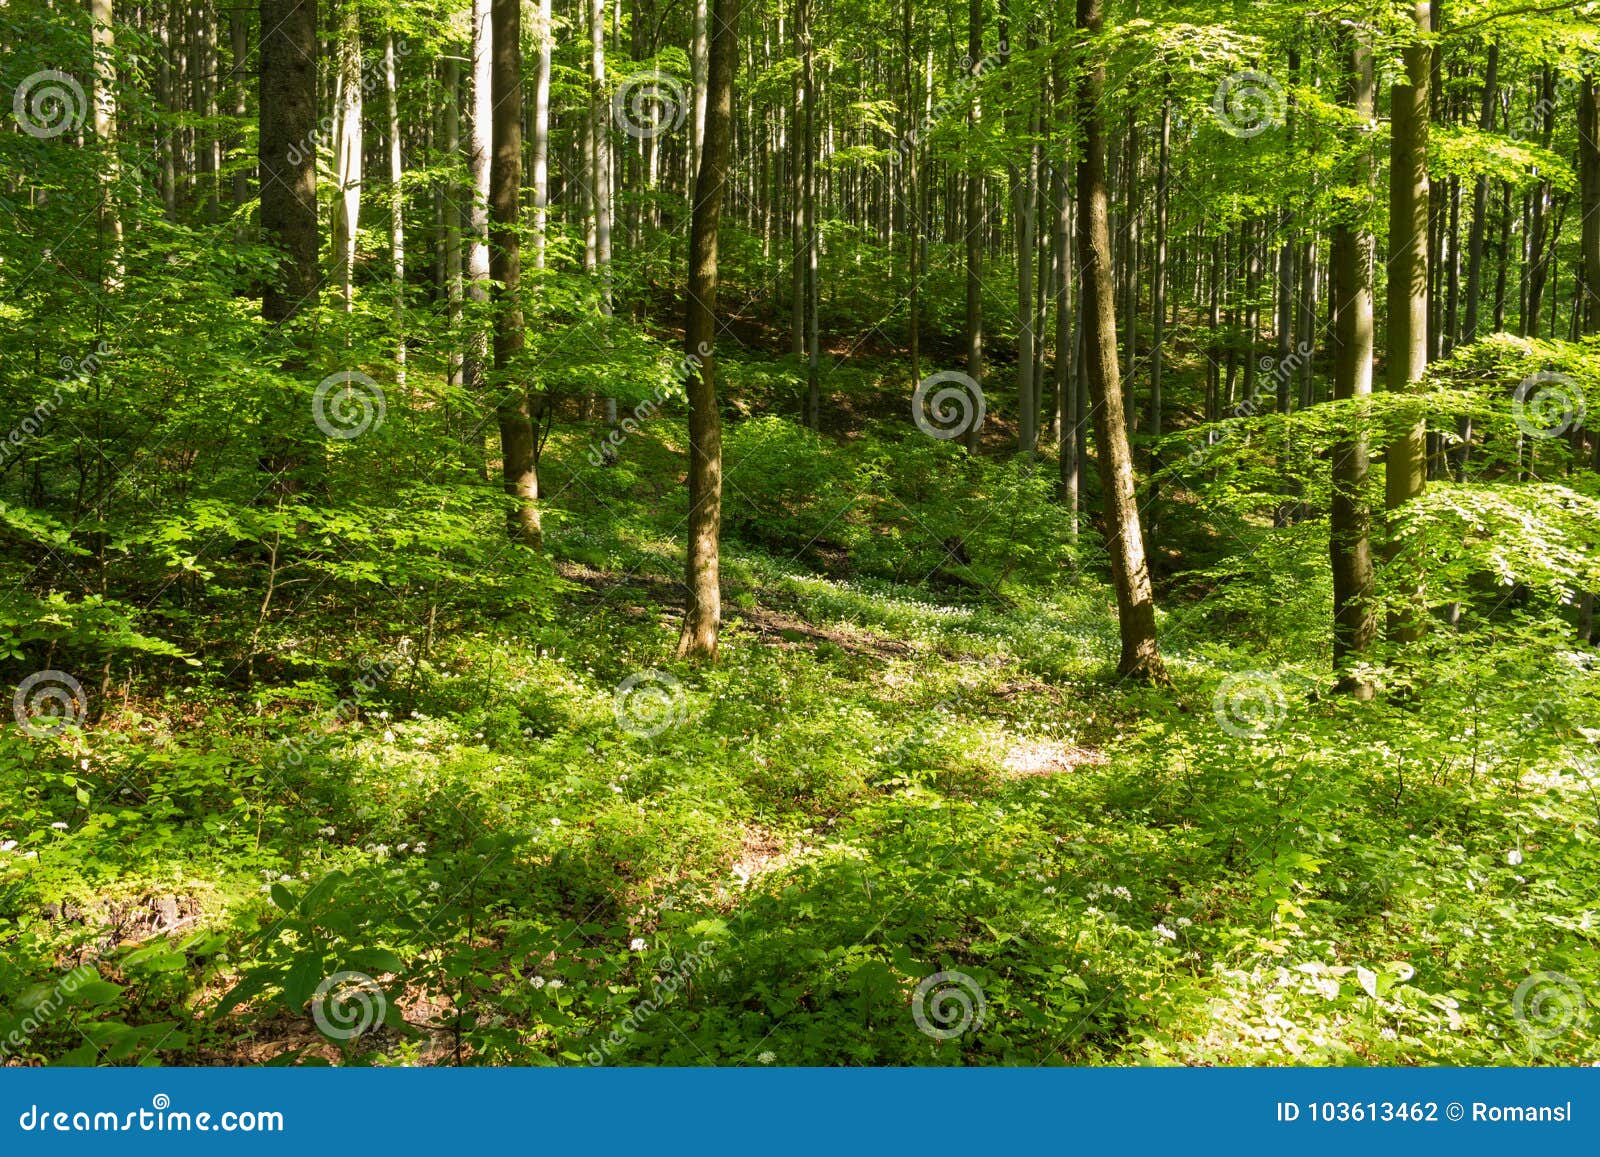 Spring Meadow with Green Trees in Mountains Stock Photo - Image of ...